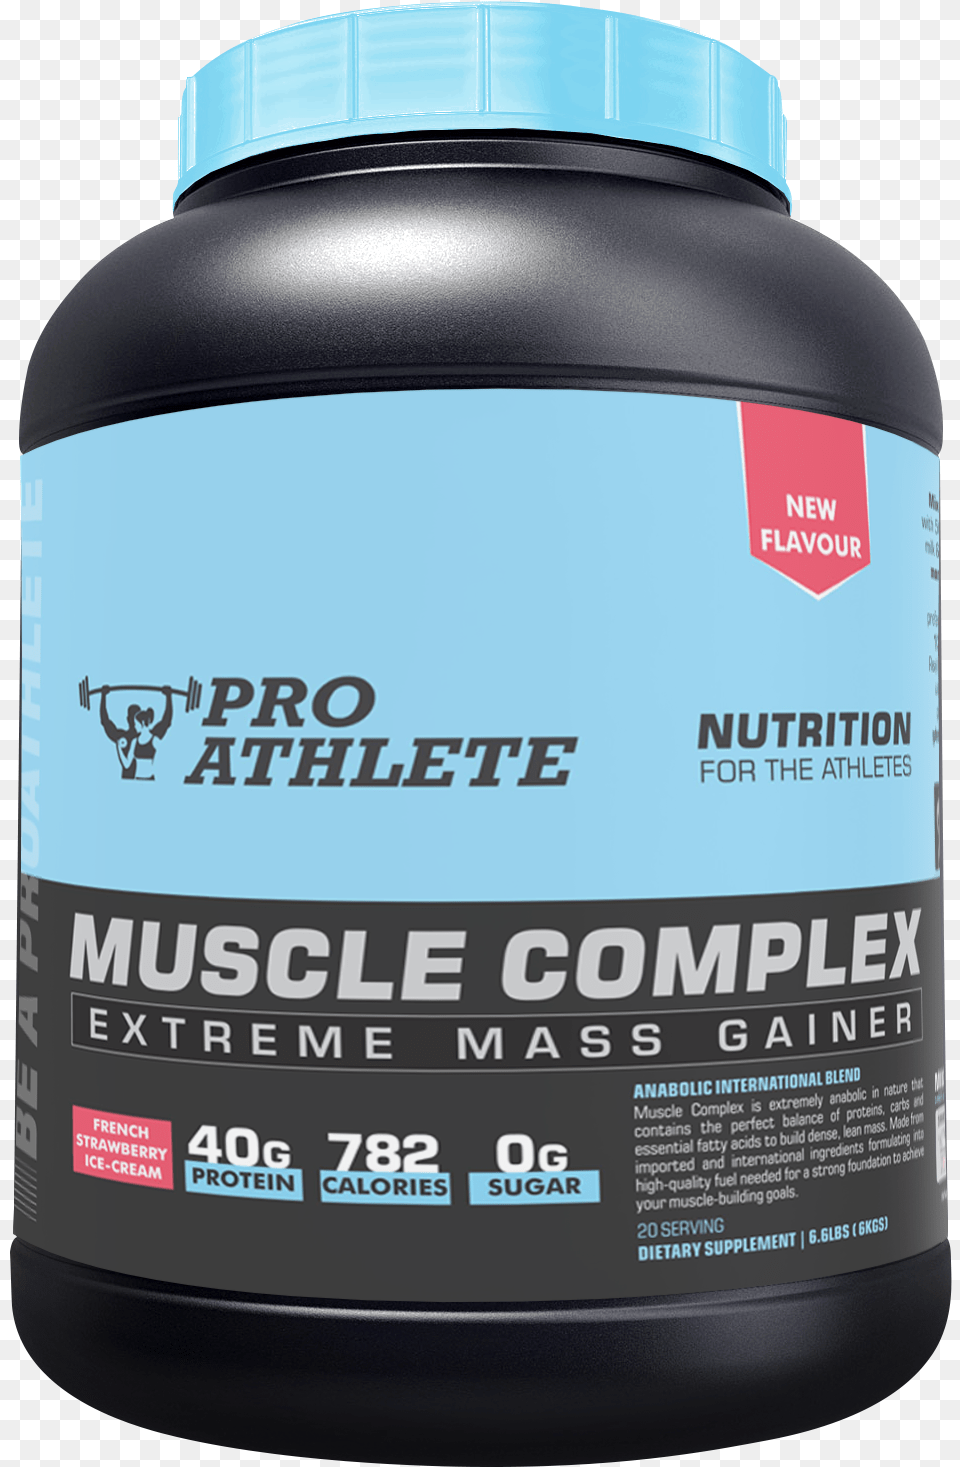 Muscle Complex Pro Athlete Nutrition For The Athletes, Bottle, Person Png Image